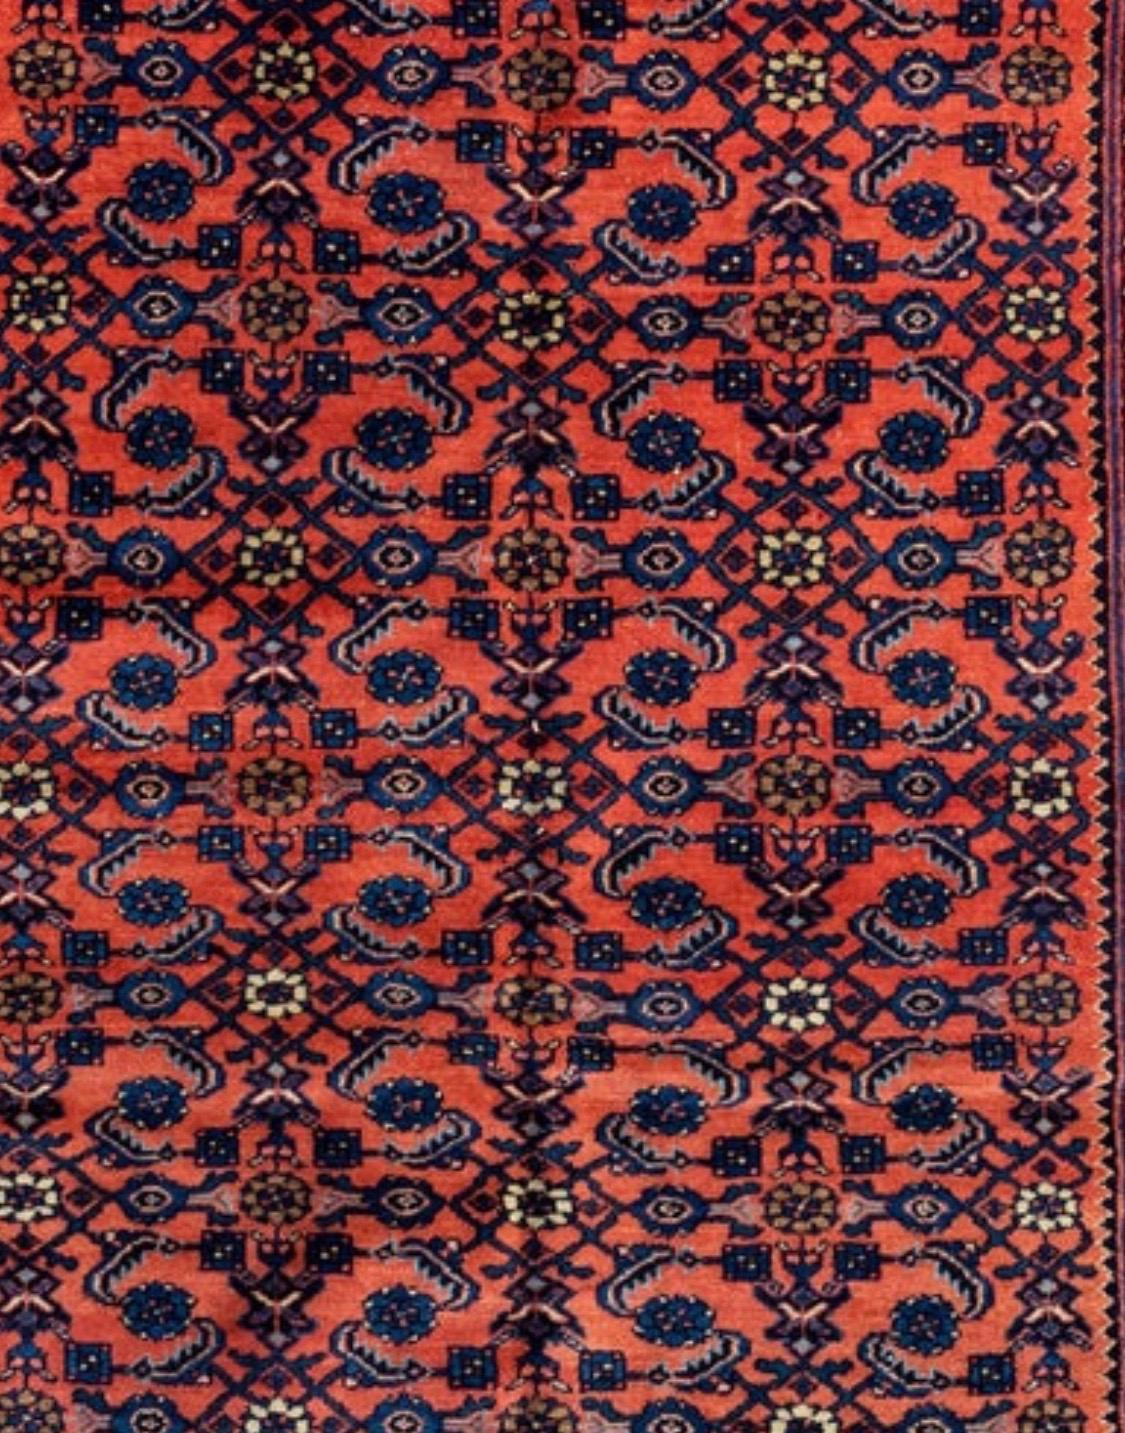 Antique rose red and navy blue Persian Angeles (or Fine Lilihan) rug handwoven in the south of the city of Arak by Armenians in Iran.

Lilihan rugs are known for their design. Traditionally designed with a curvilinear lattice with traditional